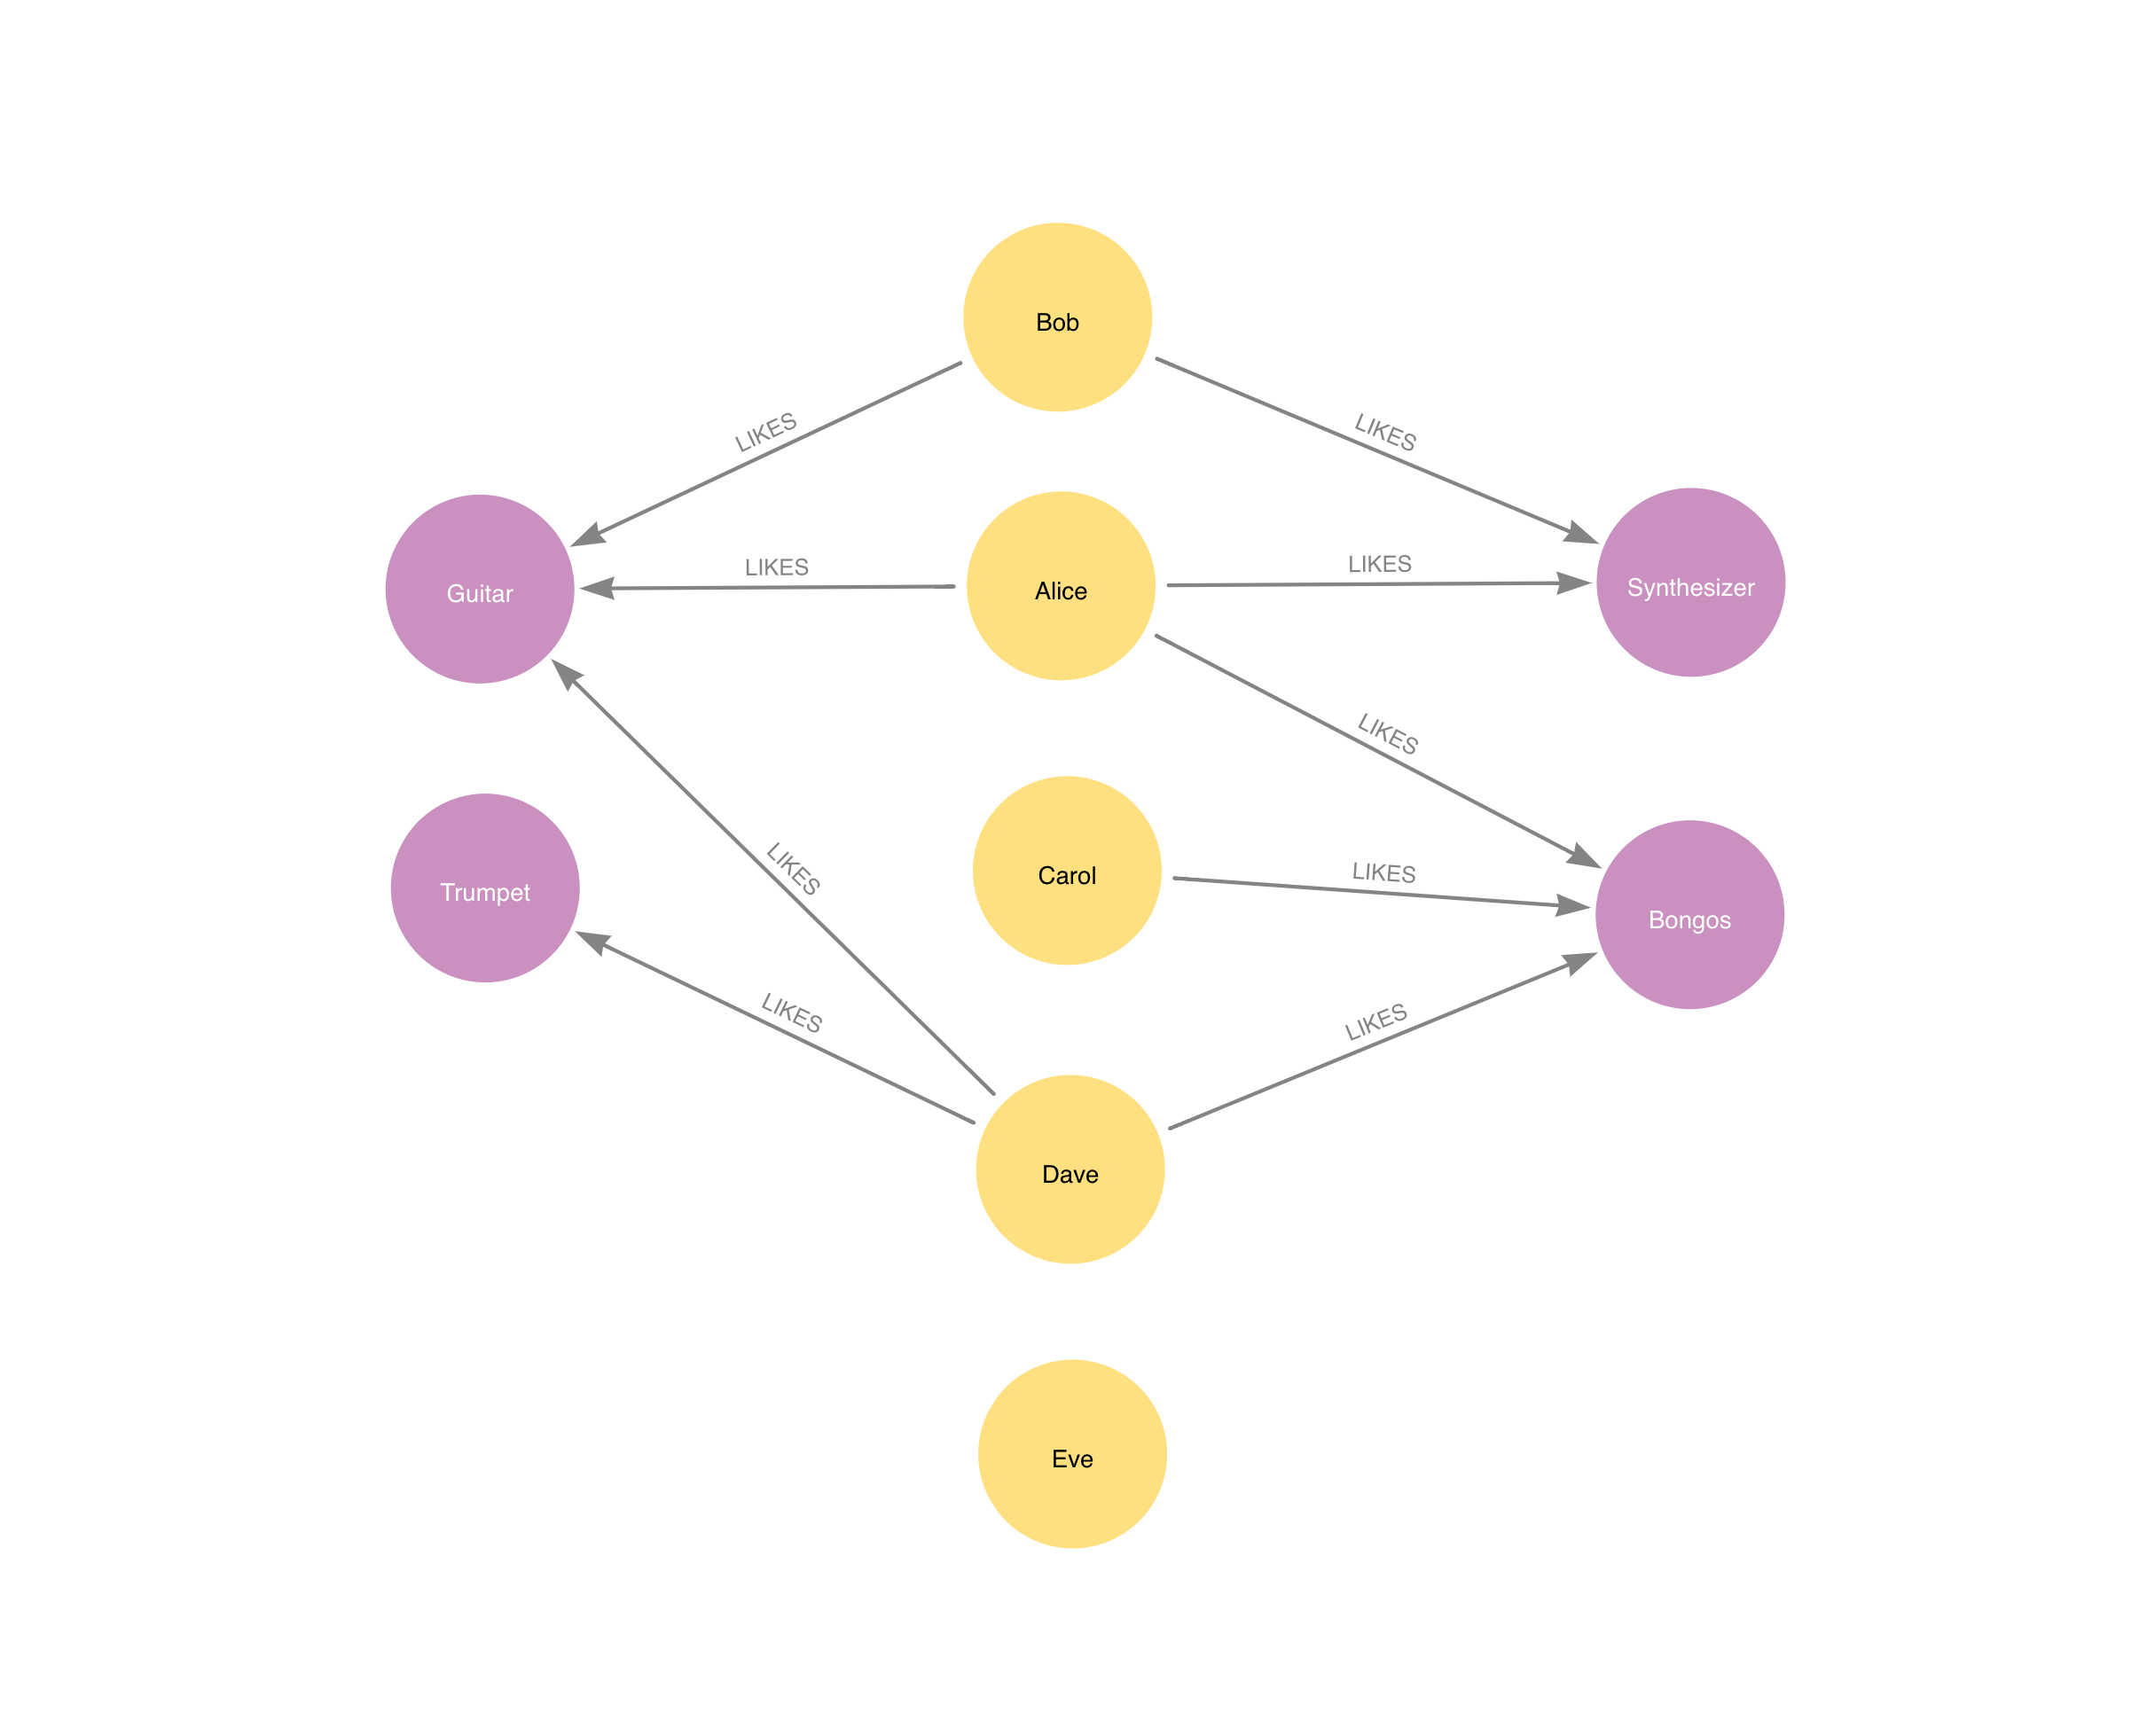 Visualization of the example graph